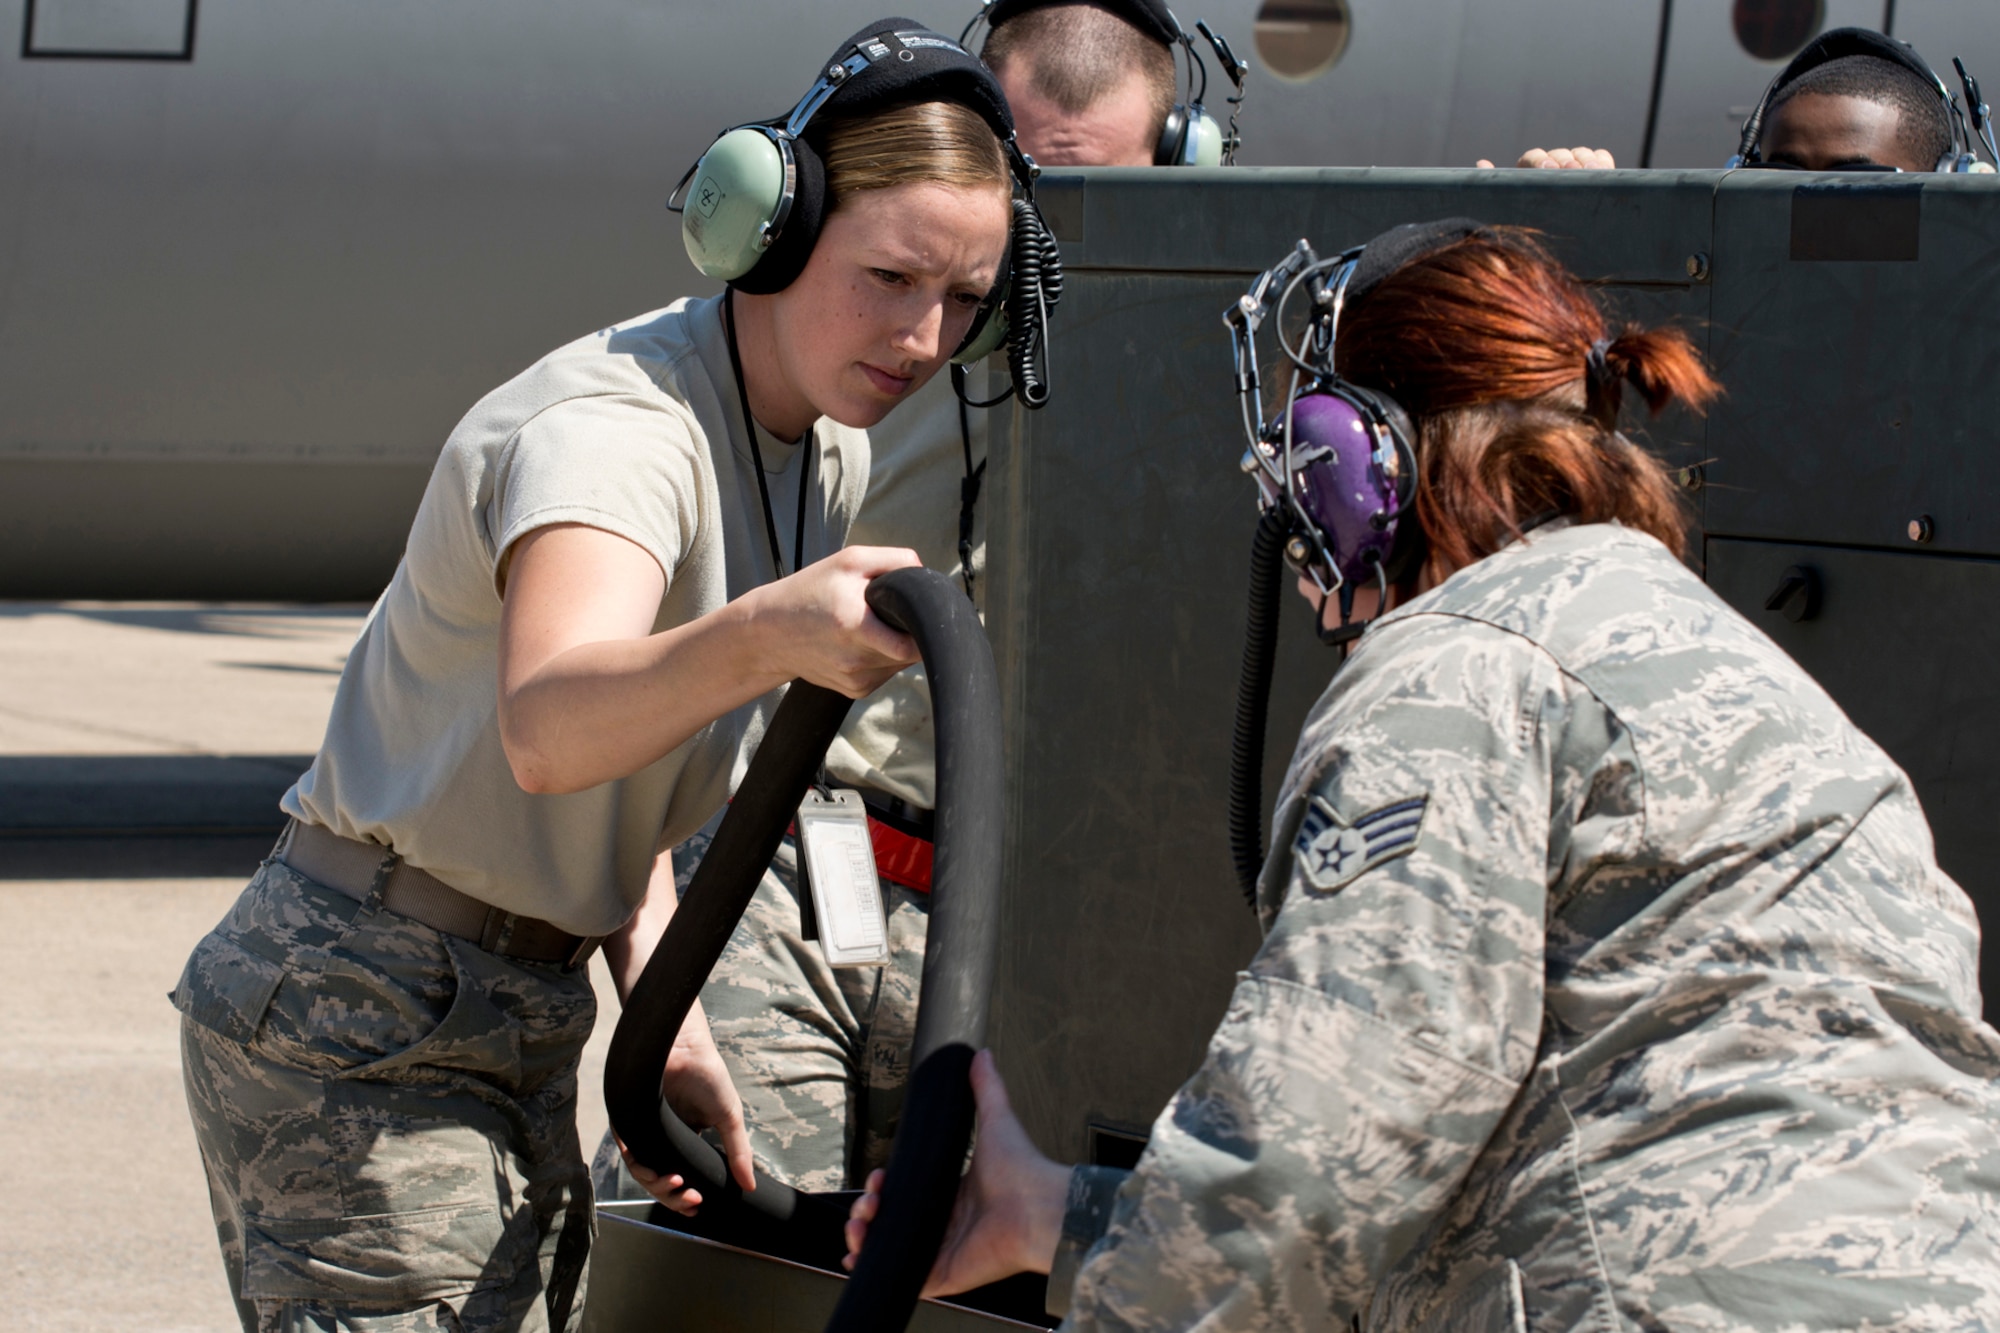 (Left) U.S. Air Force Reserve Senior Airmen Jennifer Franke helps stow a power cart cable at Little Rock Air Force Base, Ark, May 13, 2016. Franke is a crew chief assigned to the 913th Maintenance Squadron, and was part of the Reserve maintenance crew that helped launch the first all Reserve aircrew mission in a C-130J aircraft for the 913th Airlift Group since its transition from the “H” model. (U.S. Air Force photo by Master Sgt. Jeff Walston/Released)   